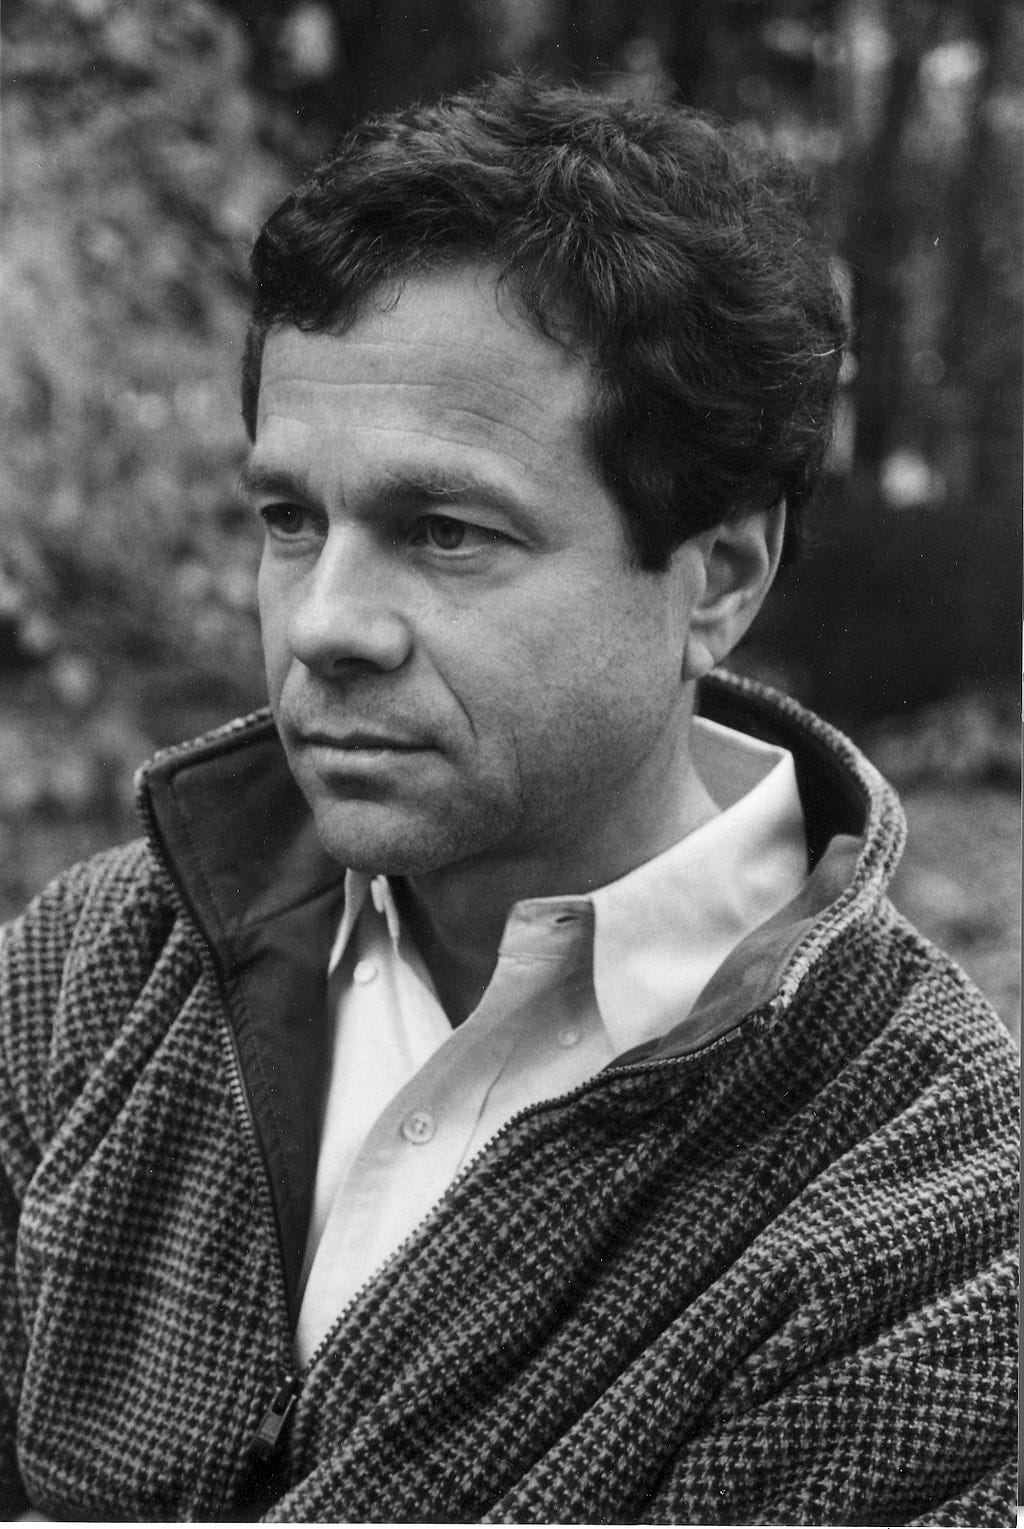 Alan Lightman — image courtesy of Public Domain and Wikimedia Commons